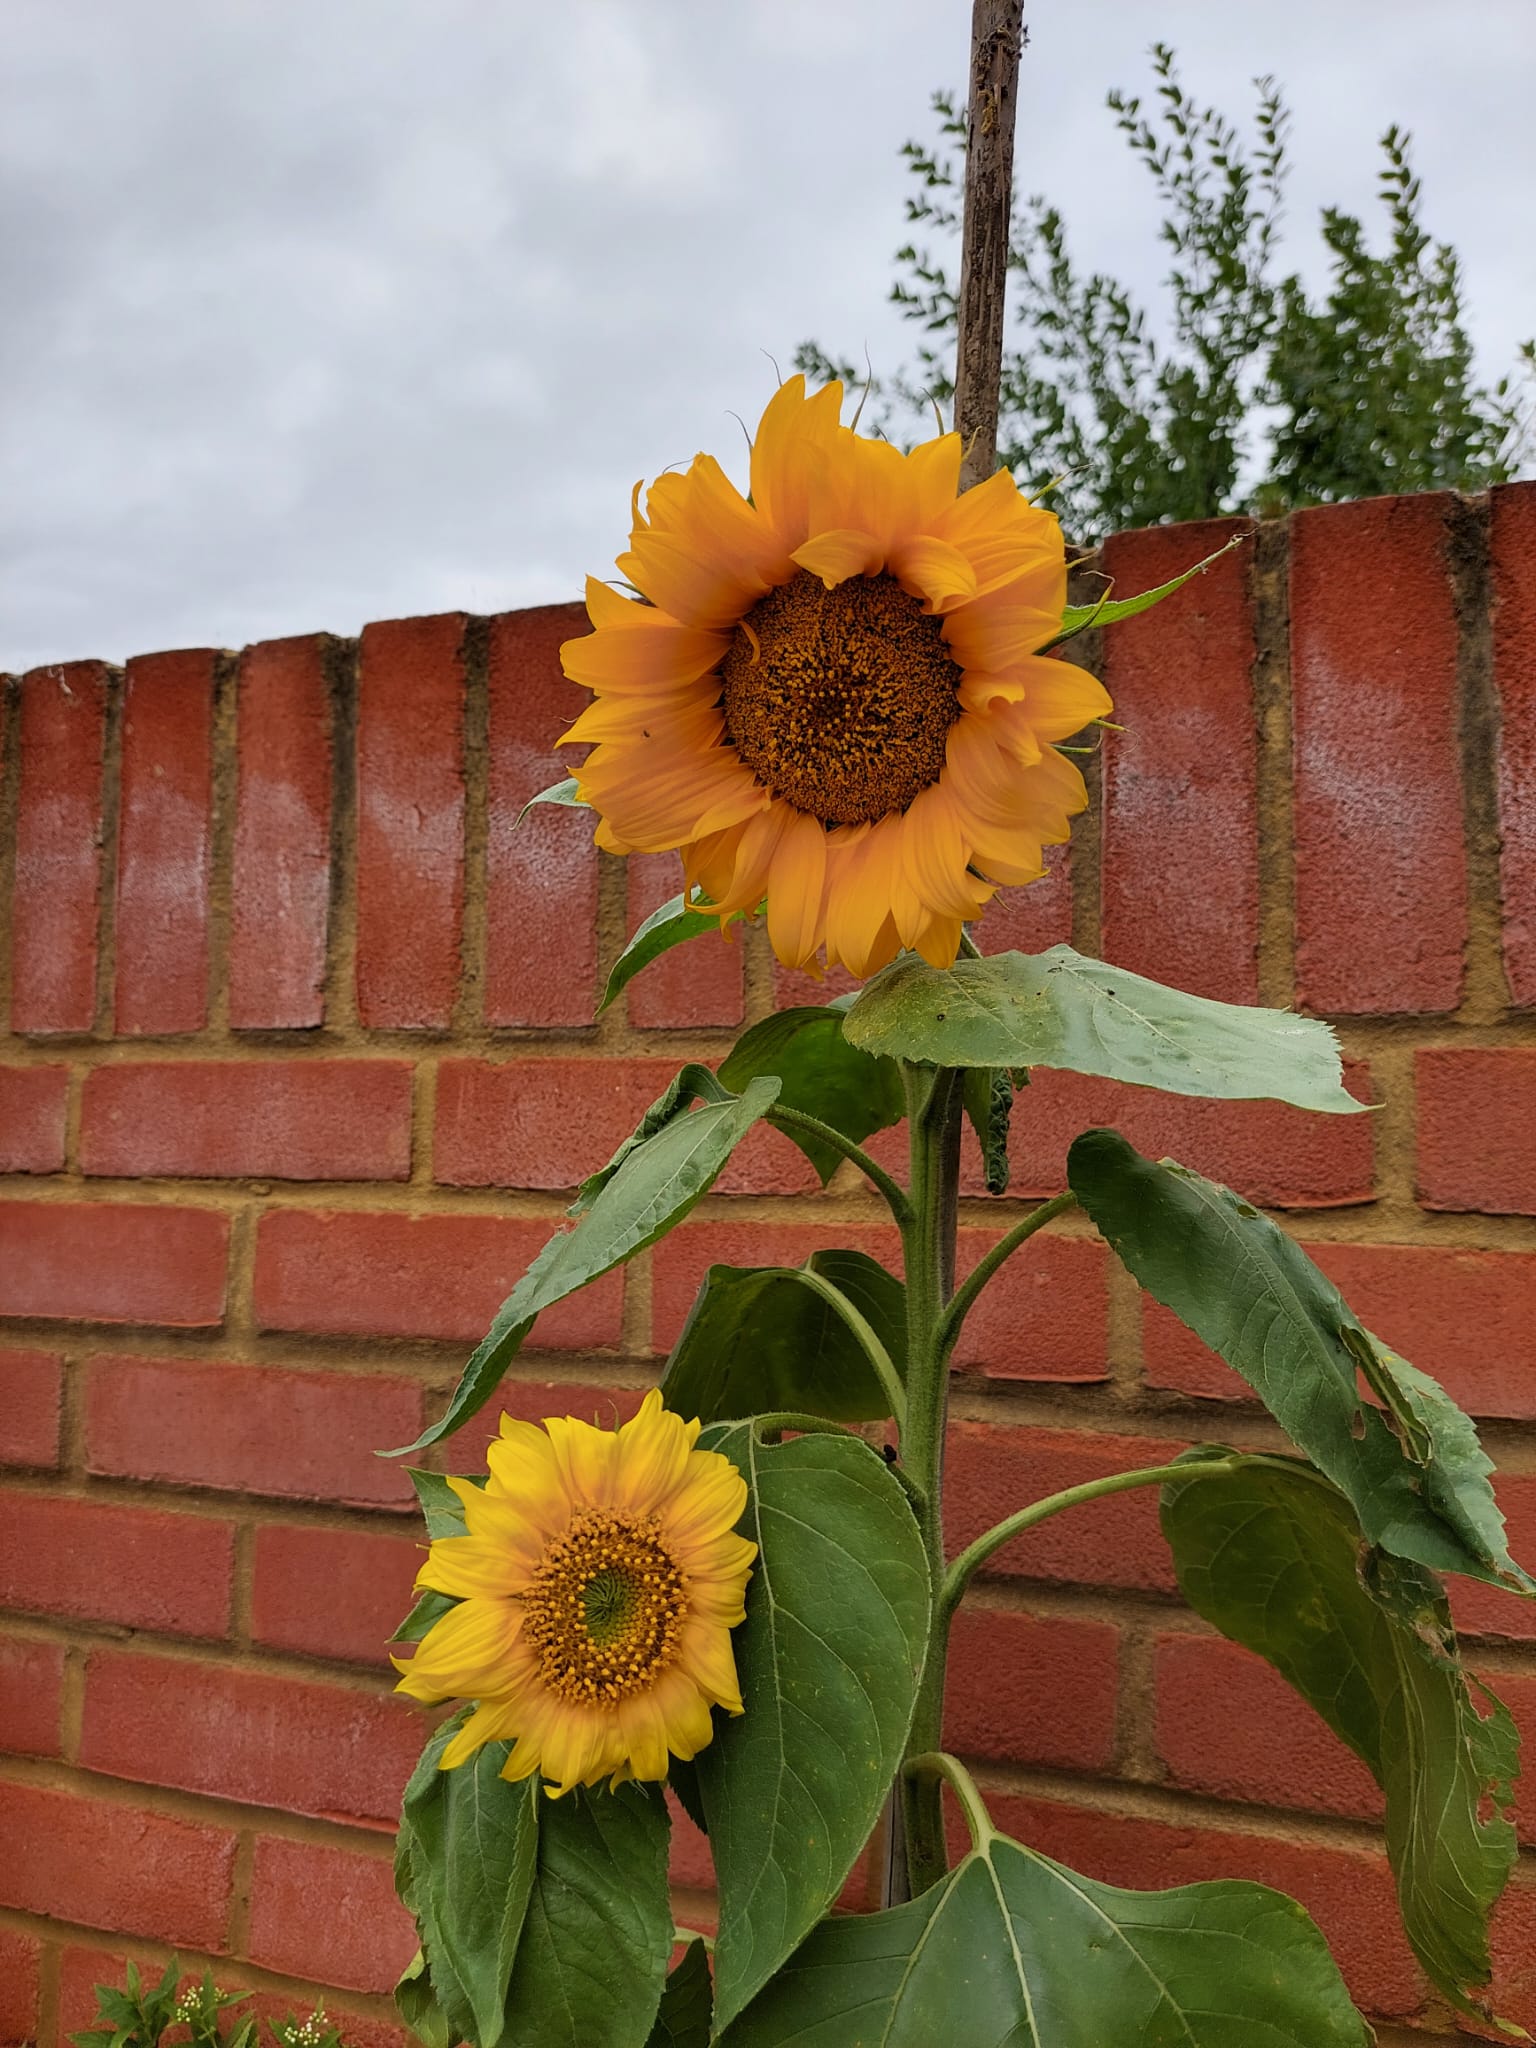 Carly and Elisha - the 2 sunflowers we grew. They have certainly gained a lot of attention in our shared garden as the neighbours have all saidit brightened up their day when they see them either from their window or down in the garden.